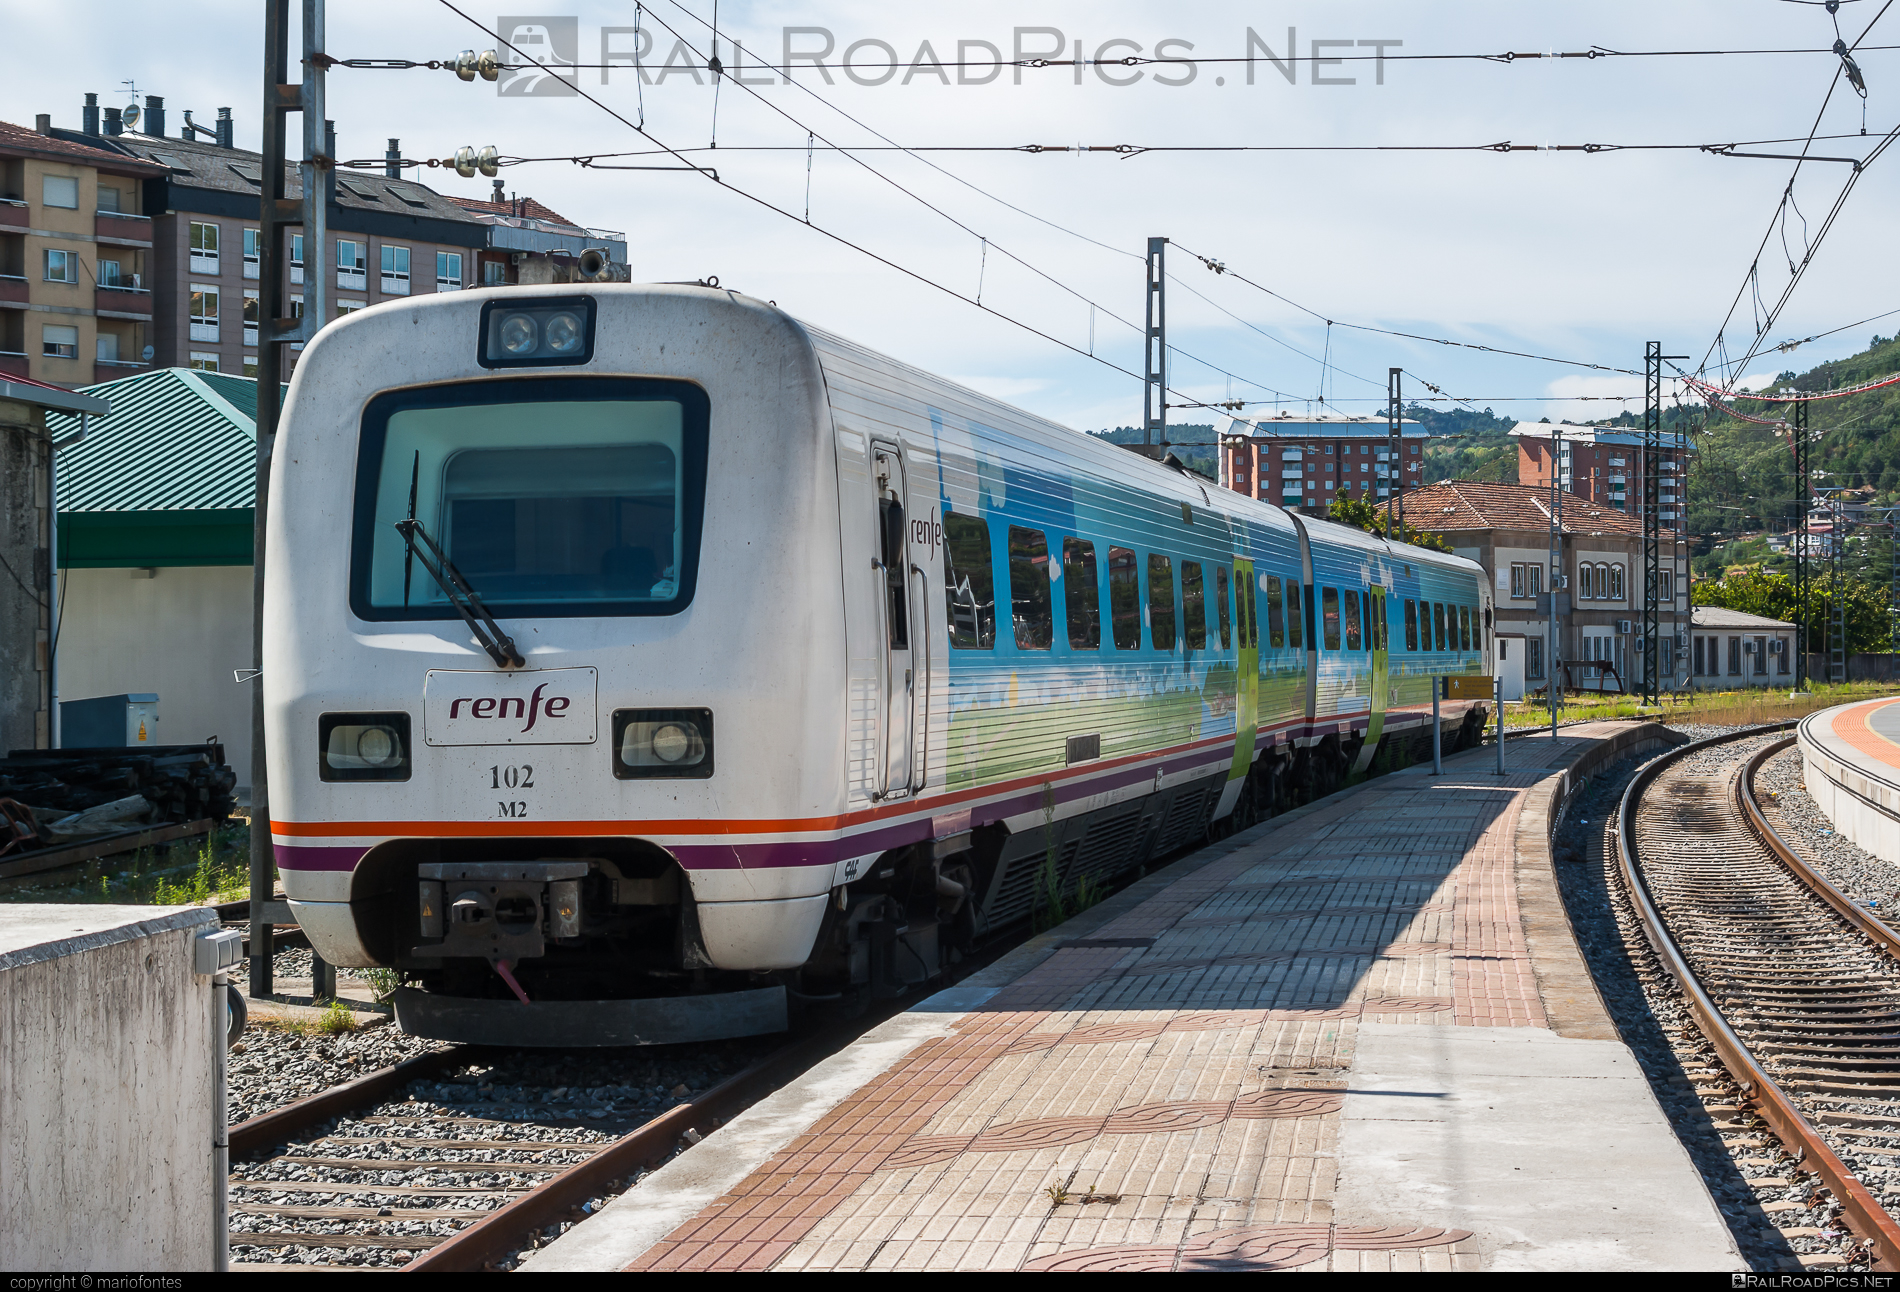 Renfe Class 594.1 - 102 operated by Renfe Viajeros, S.A. #renfe #renfeClass594 #renfeViajeros #renfeViajerosSA